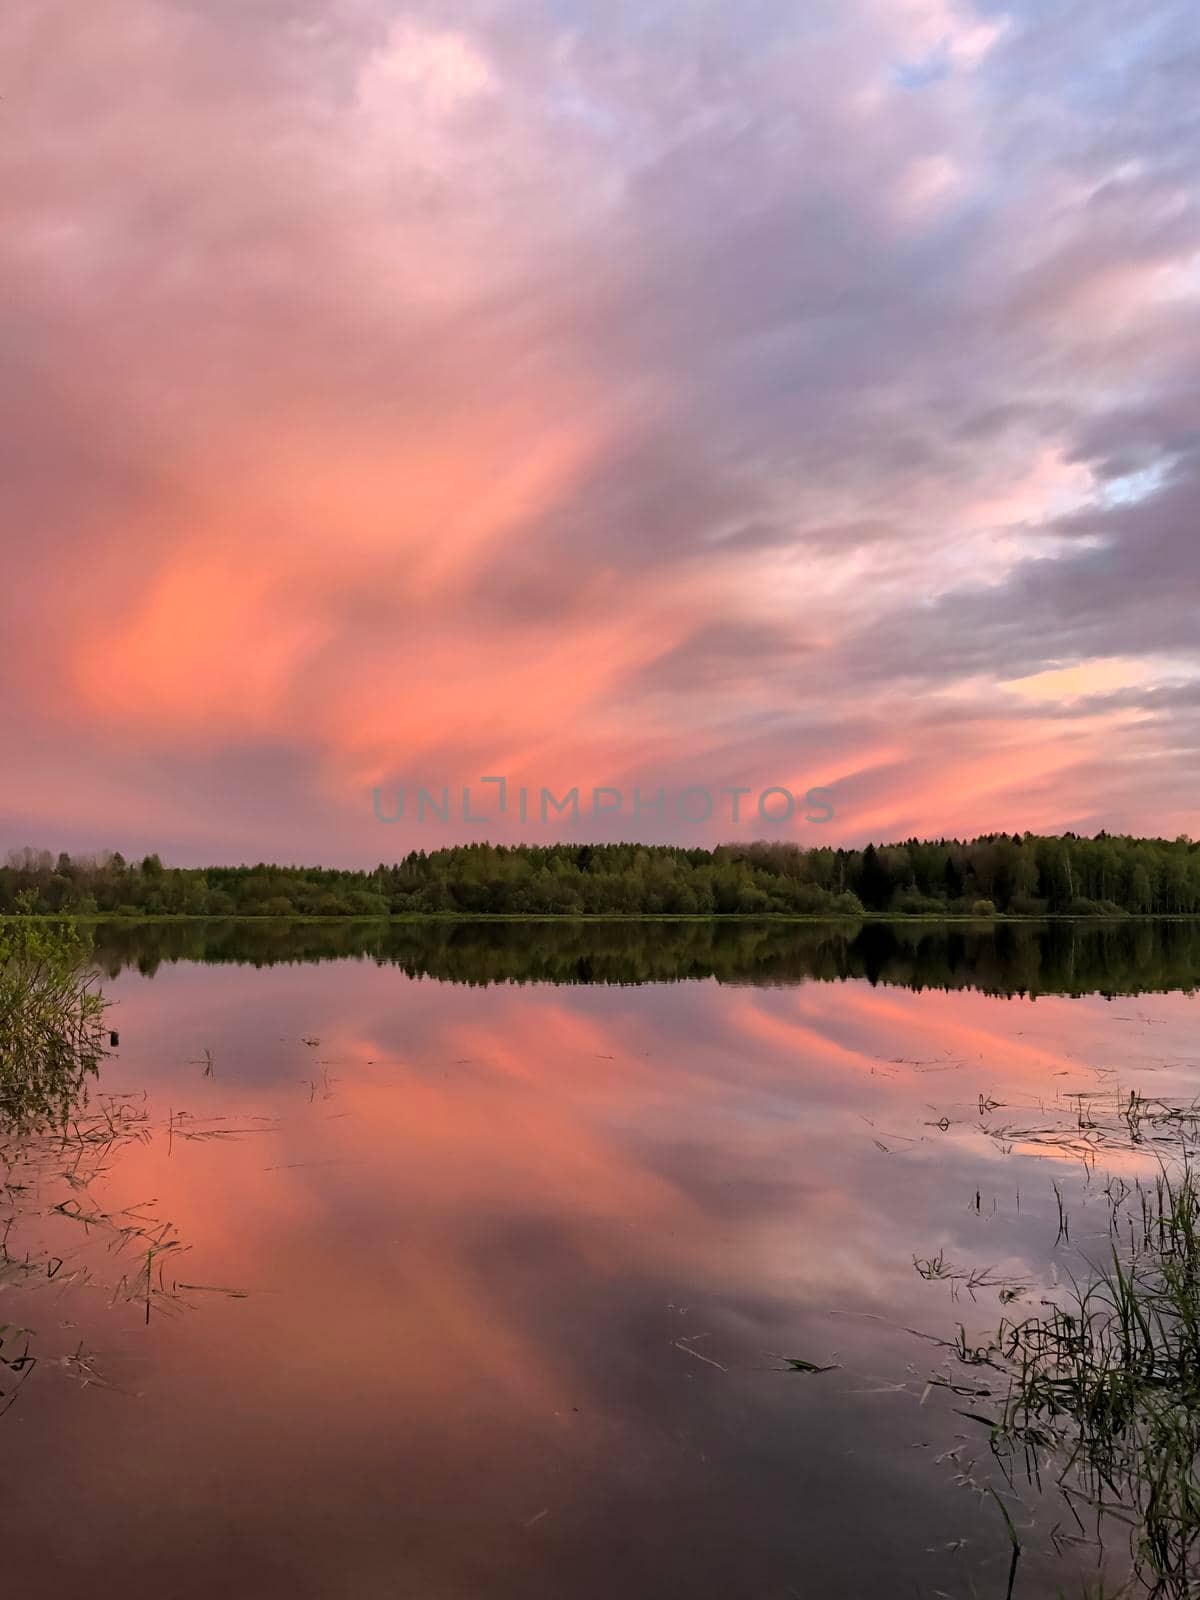 Dramatic sunset clouds over lake and trees - stock photo. High quality photo